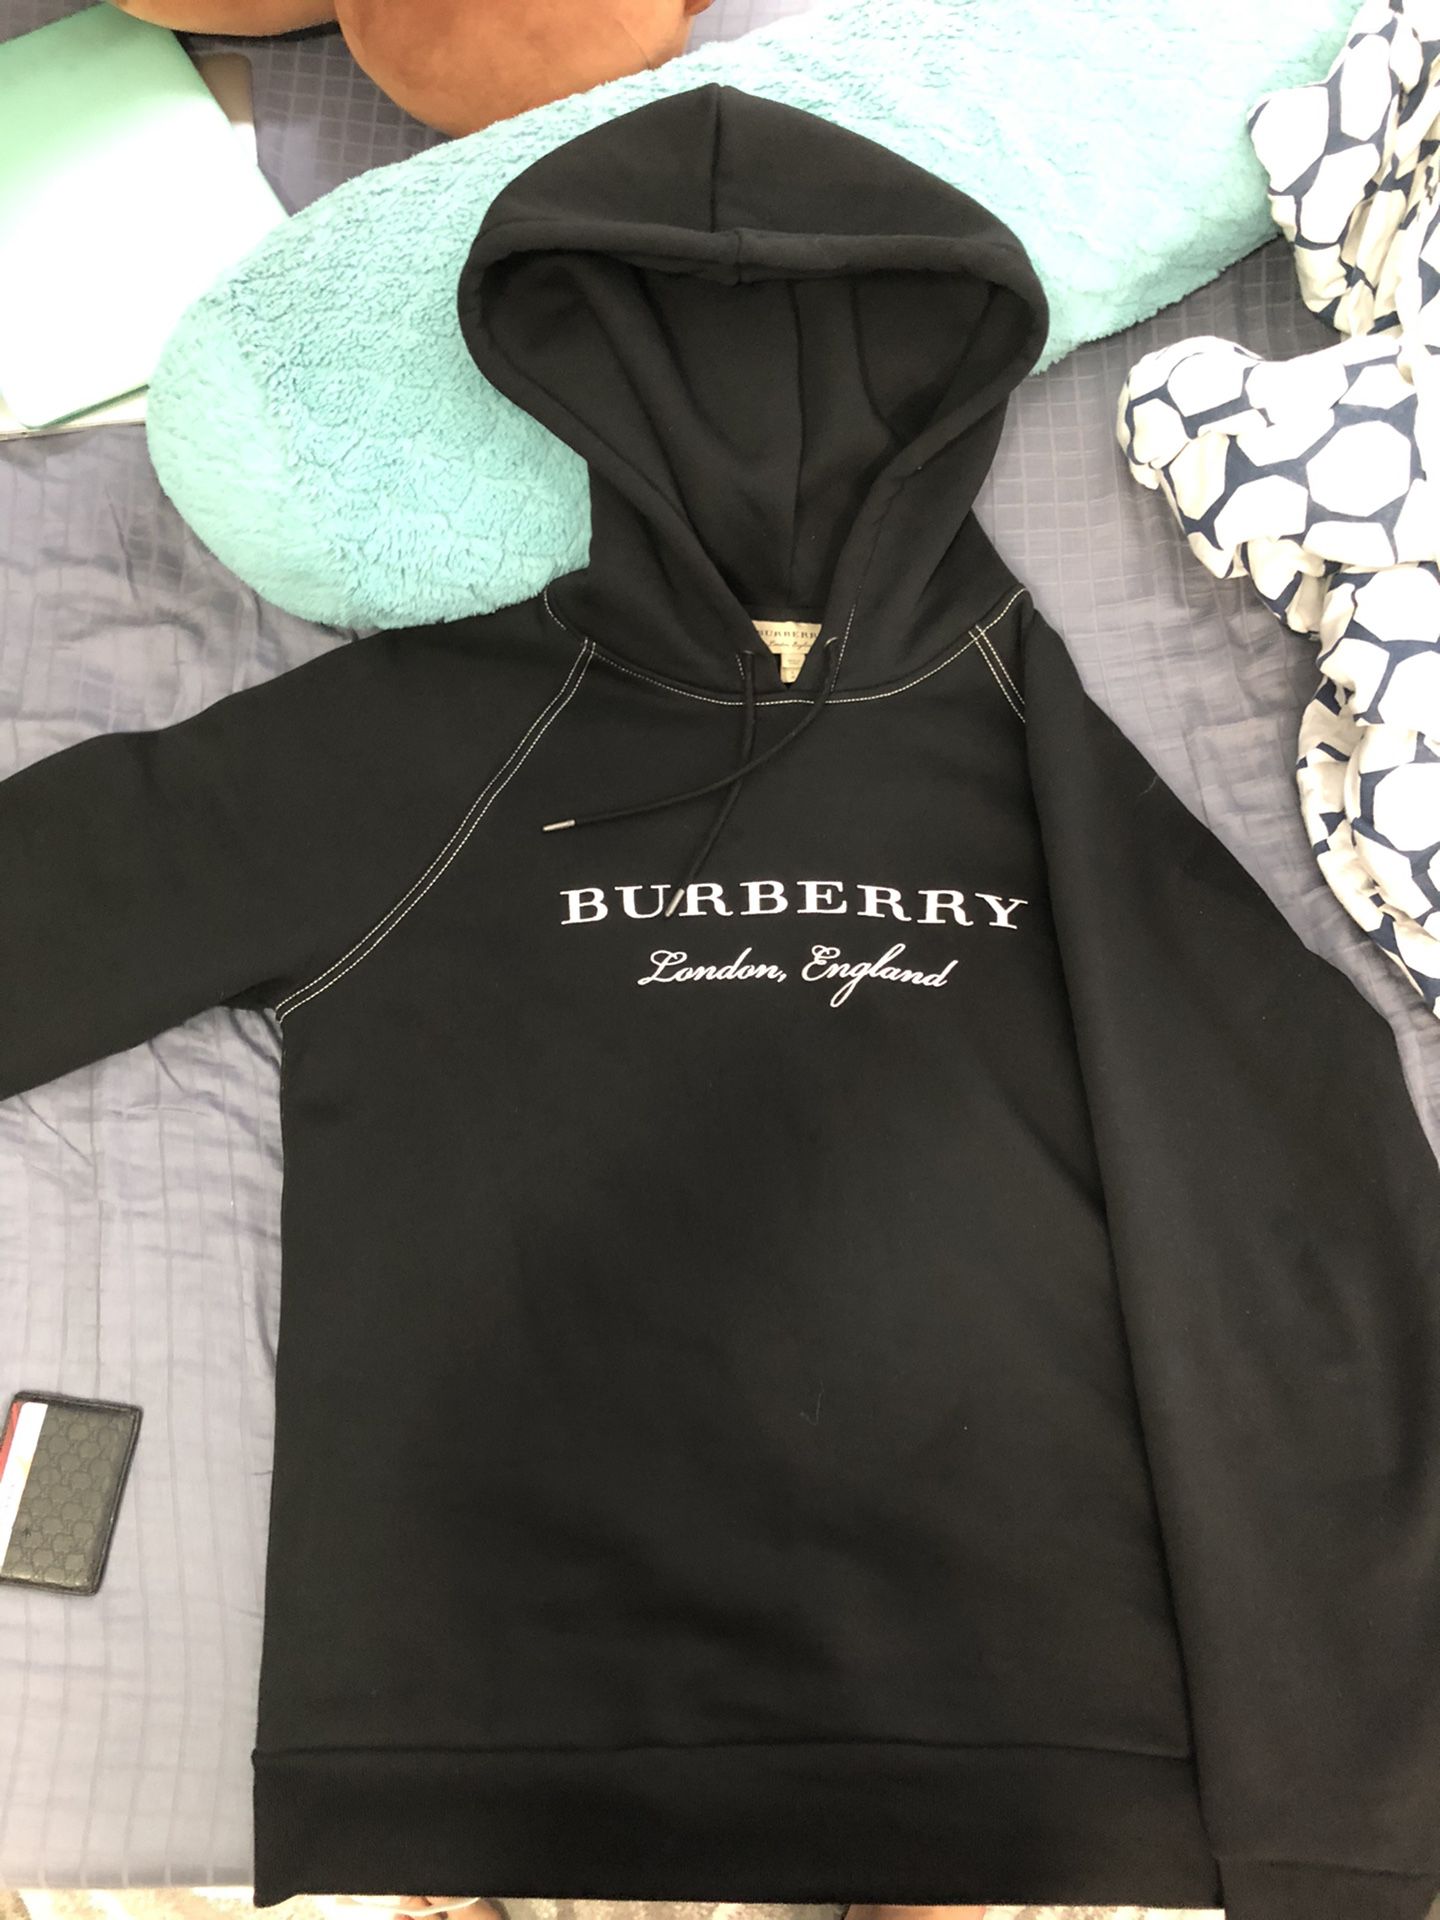 Burberry hoodie for Sale in Medford, - OfferUp